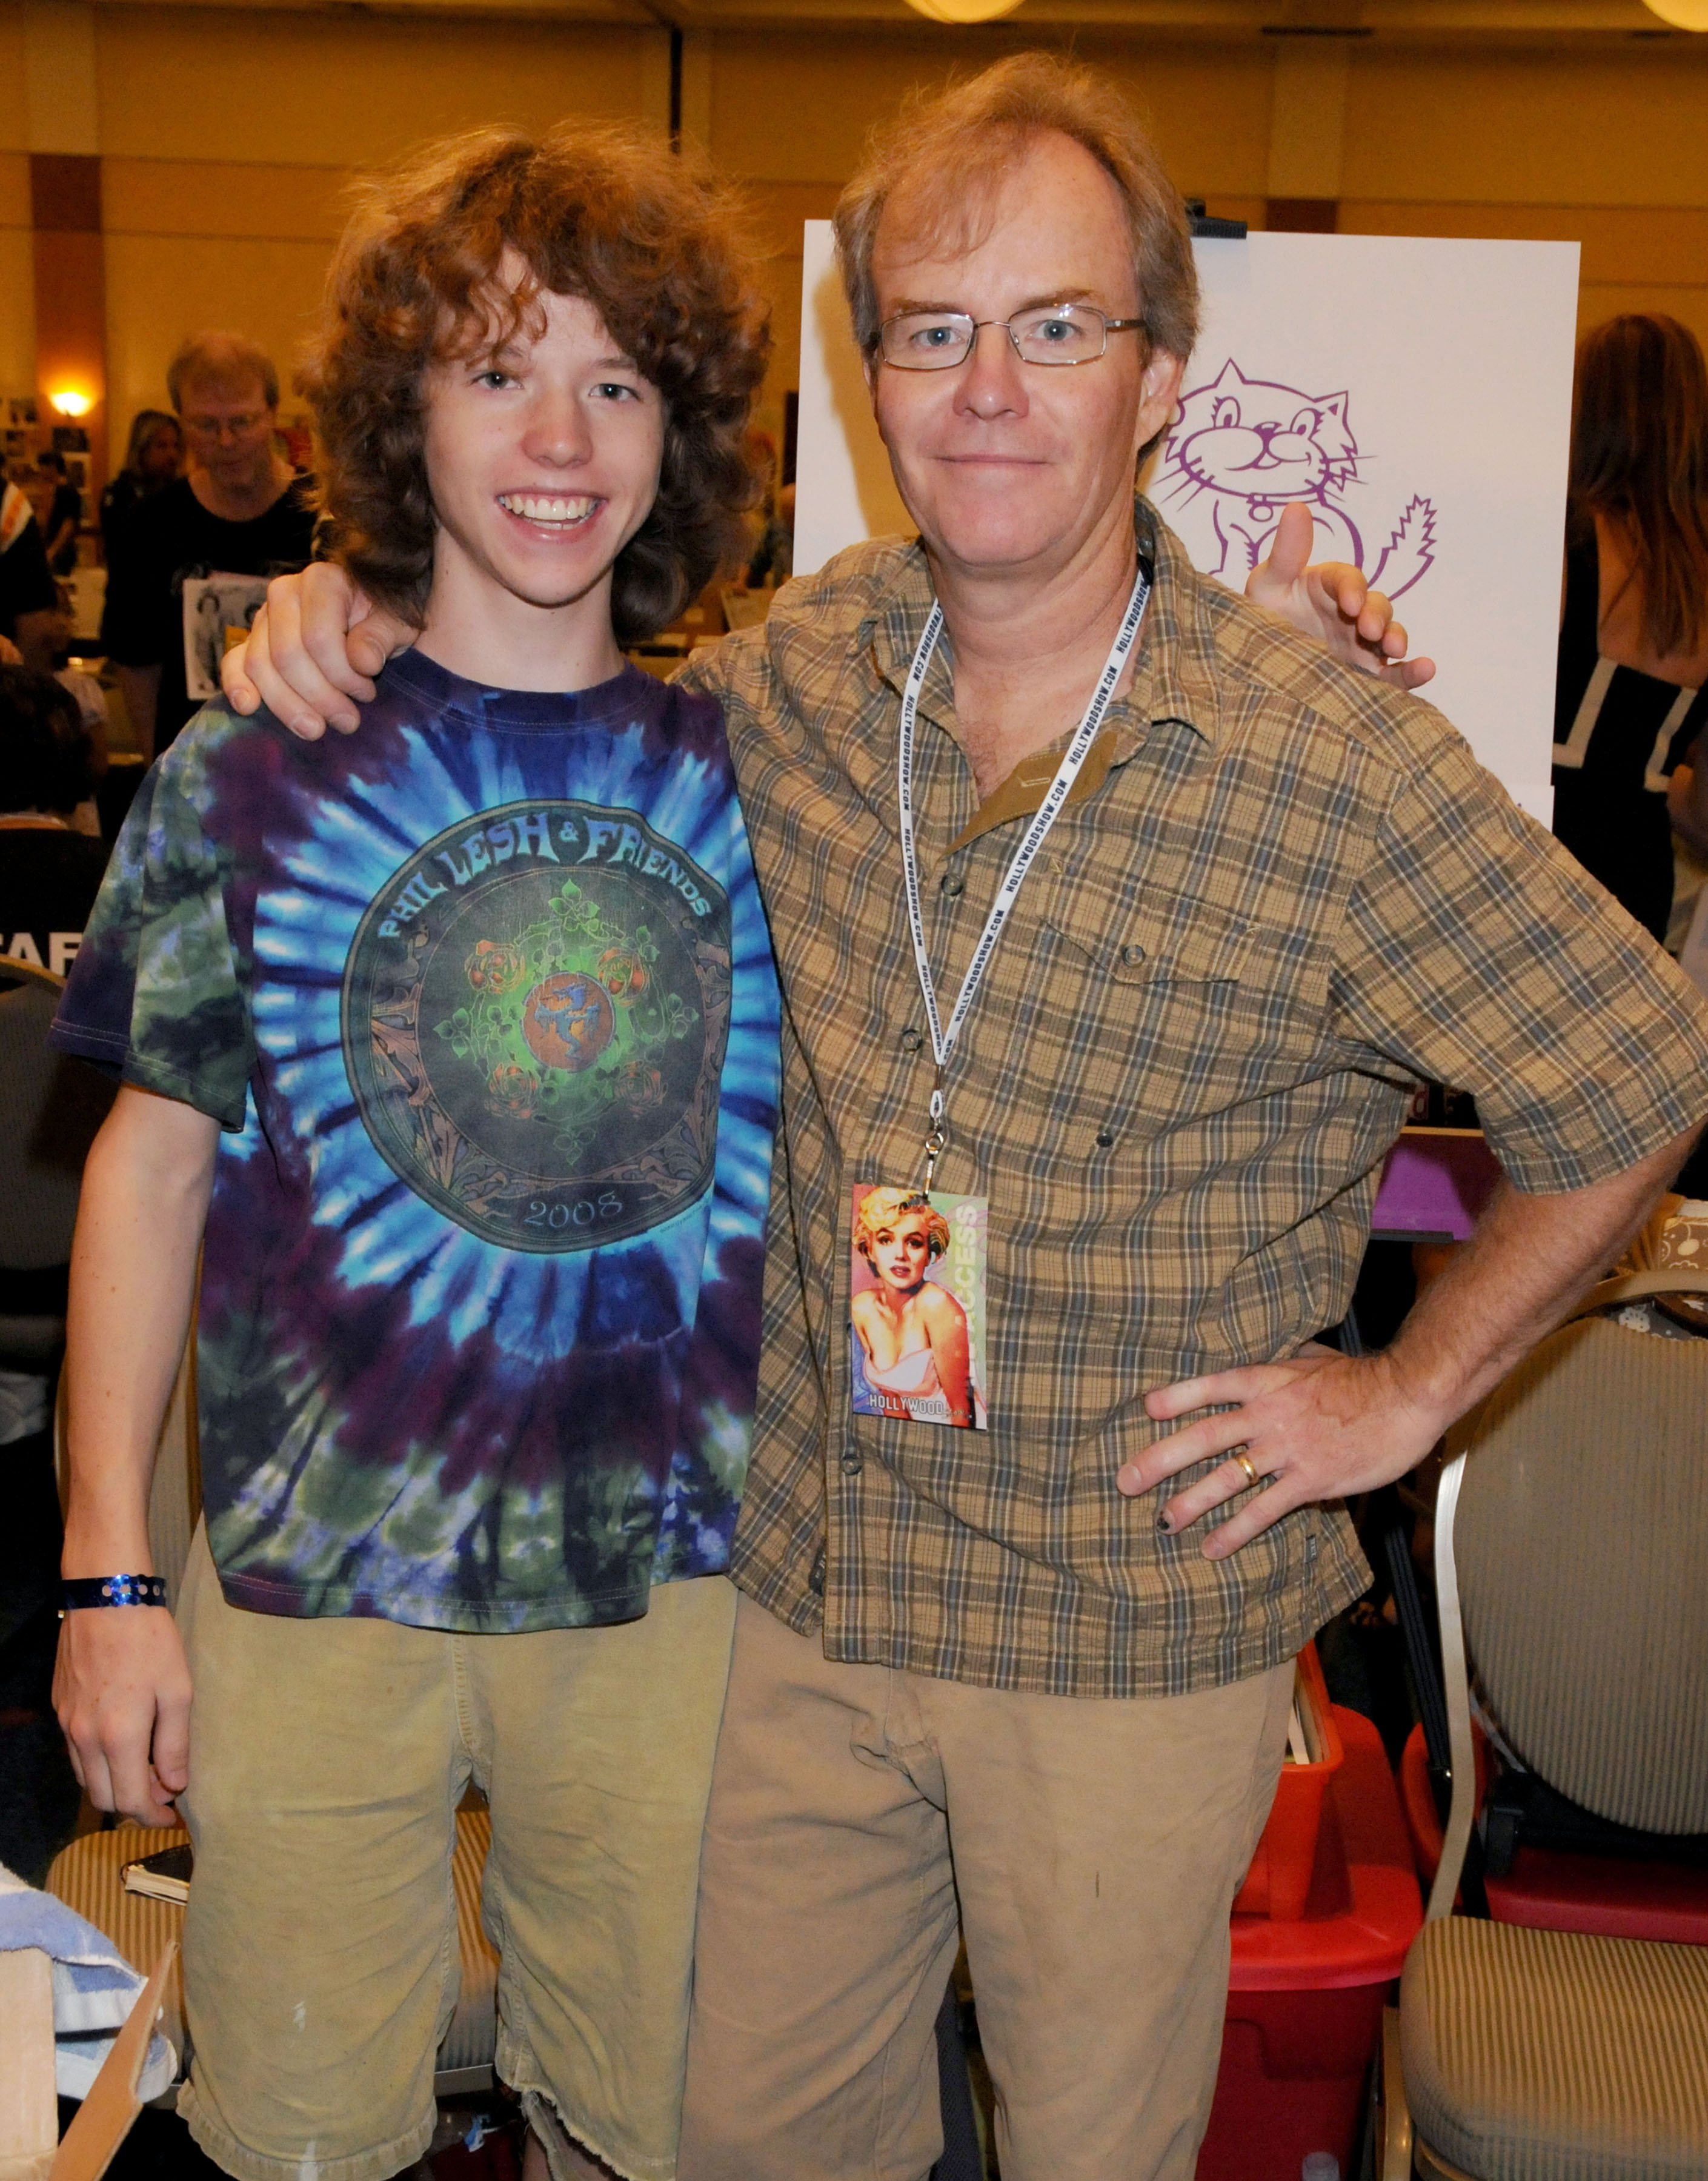 Mike Lookinland and his son Joe pose at The Hollywood Collectors & Celebrities Show in Burbank, California, on July 18, 2009 | Source: Getty Images